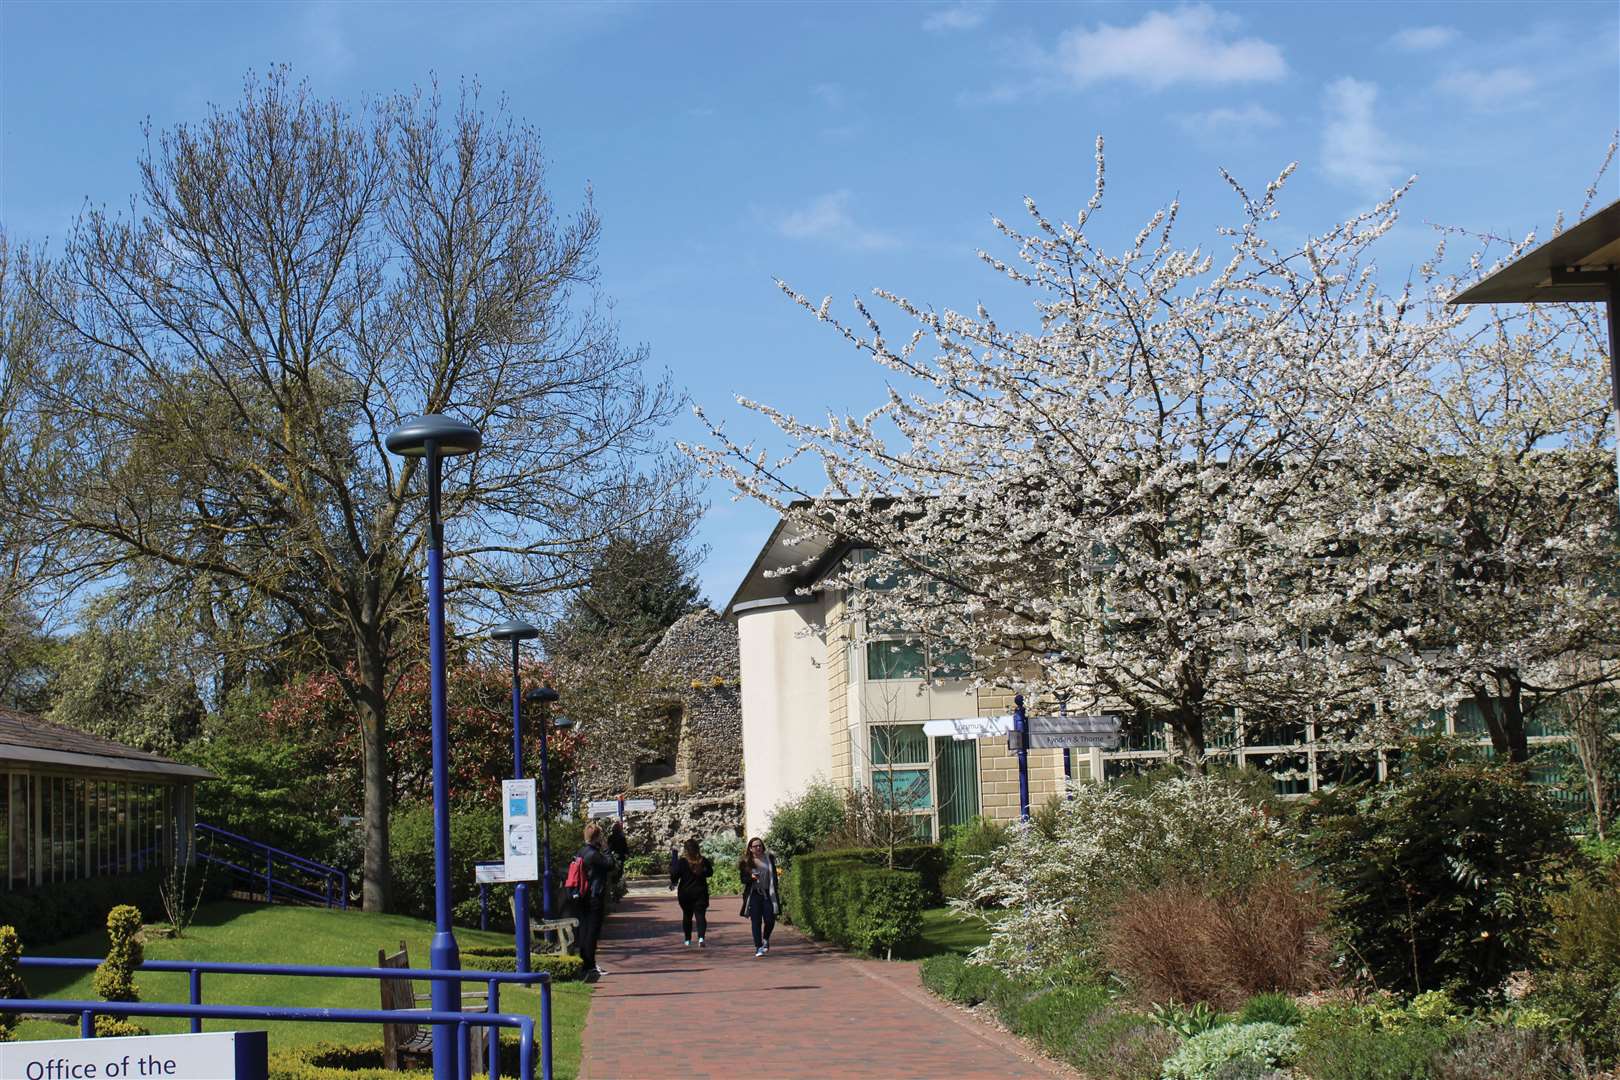 Take a tour of Christ Church’s excellent facilities